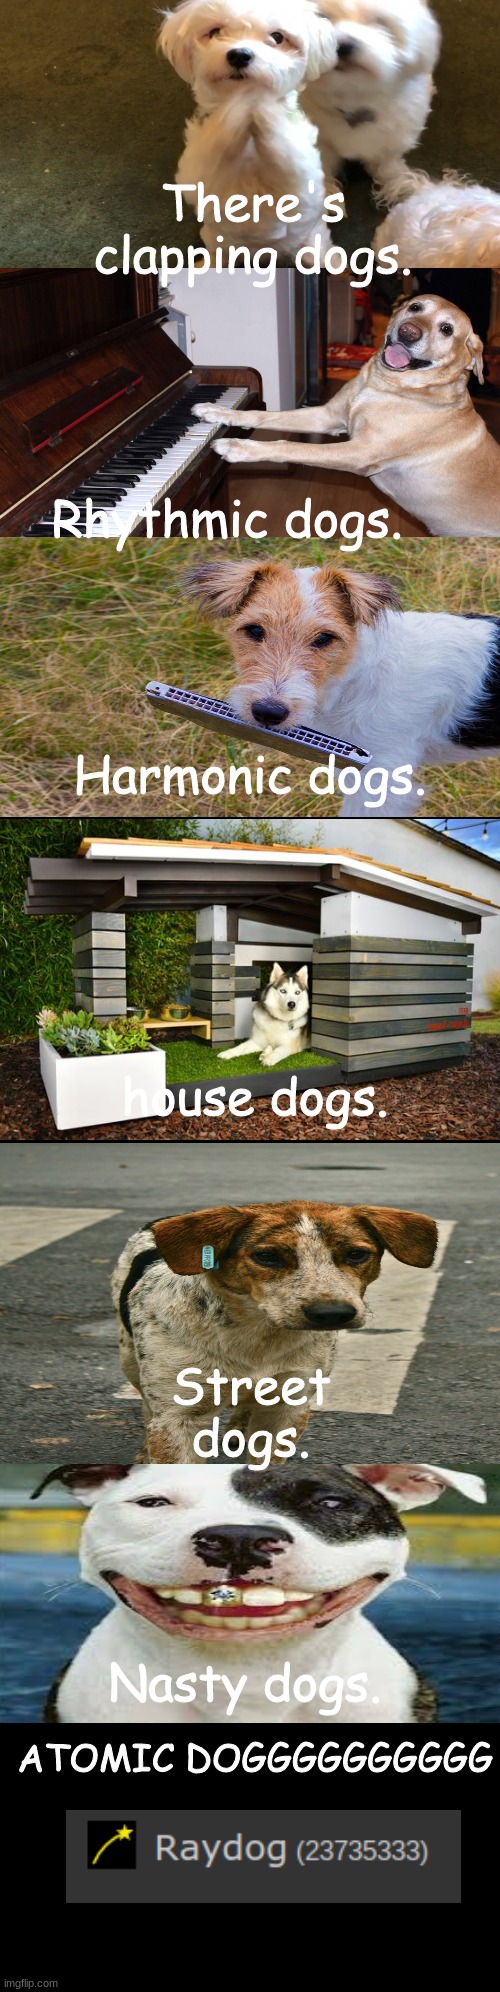 Bow-wow-wow-yippie-yo-yippie-yeah just walkin the dog! | There's clapping dogs. Rhythmic dogs. Harmonic dogs. house dogs. Street dogs. Nasty dogs. ATOMIC DOGGGGGGGGGG | image tagged in double long black template,atomic dog,raydog | made w/ Imgflip meme maker